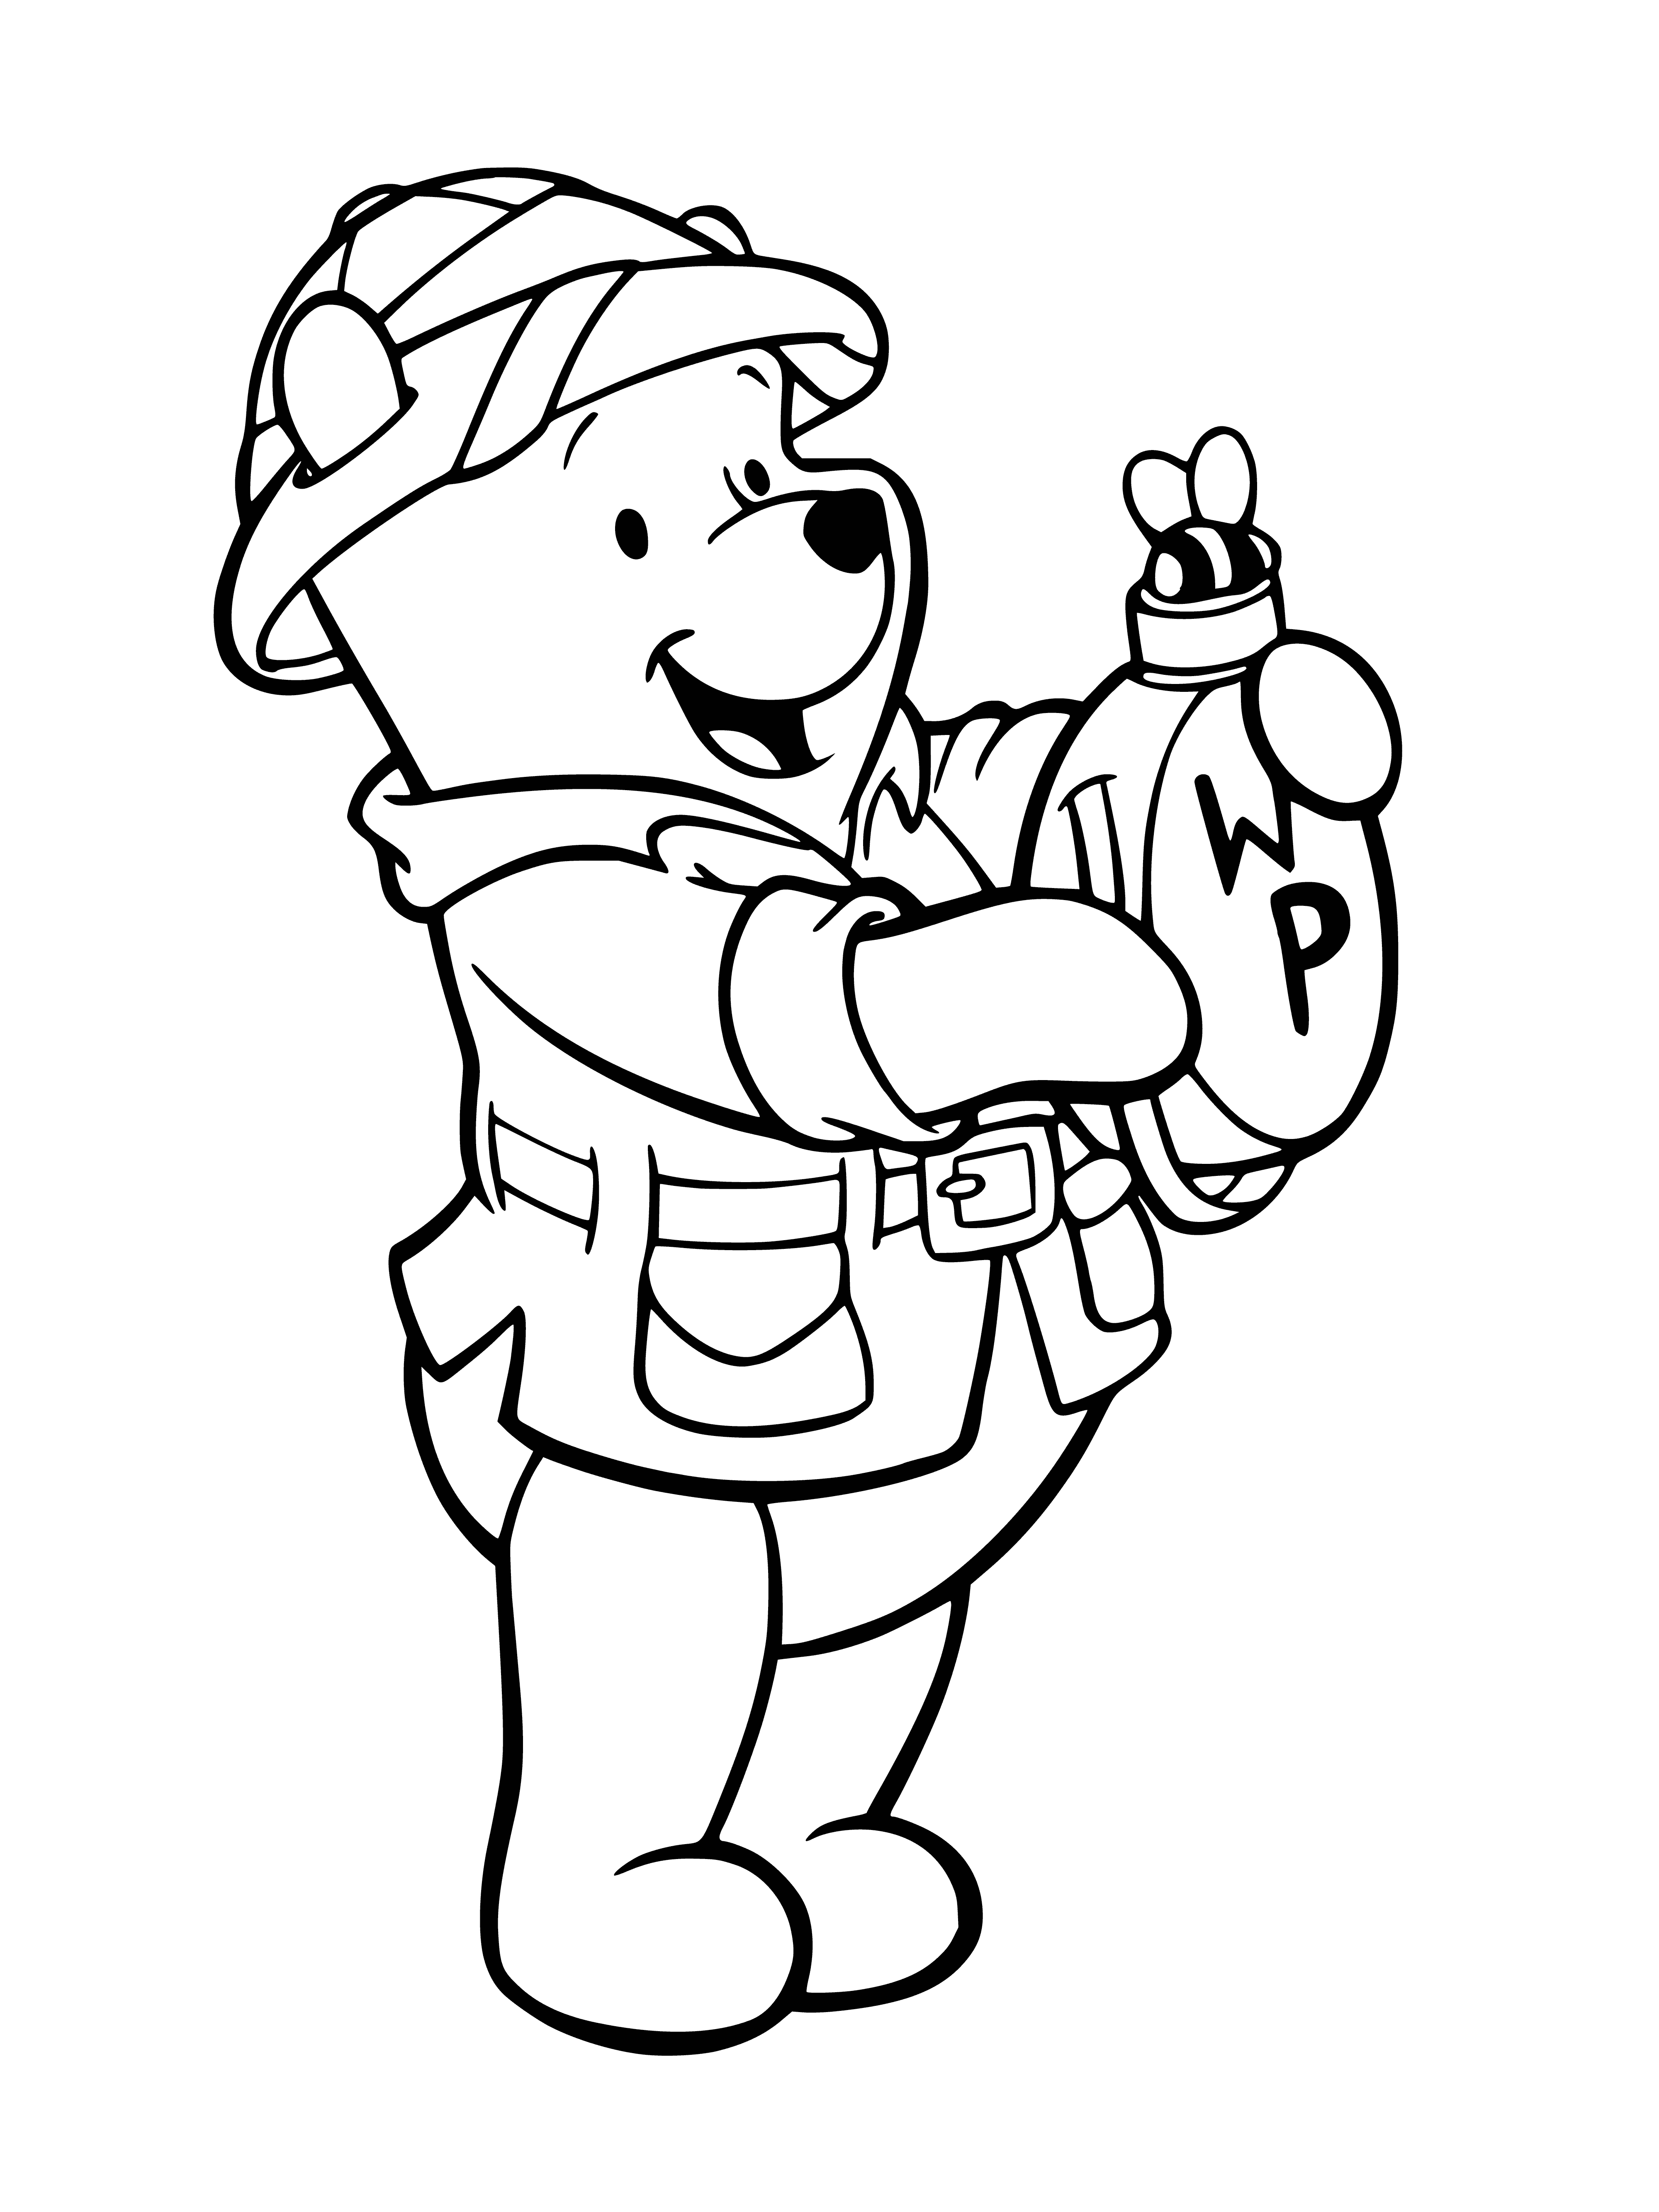 coloring page: Winnie and Piglet explore the forest, following a map in search of adventure.